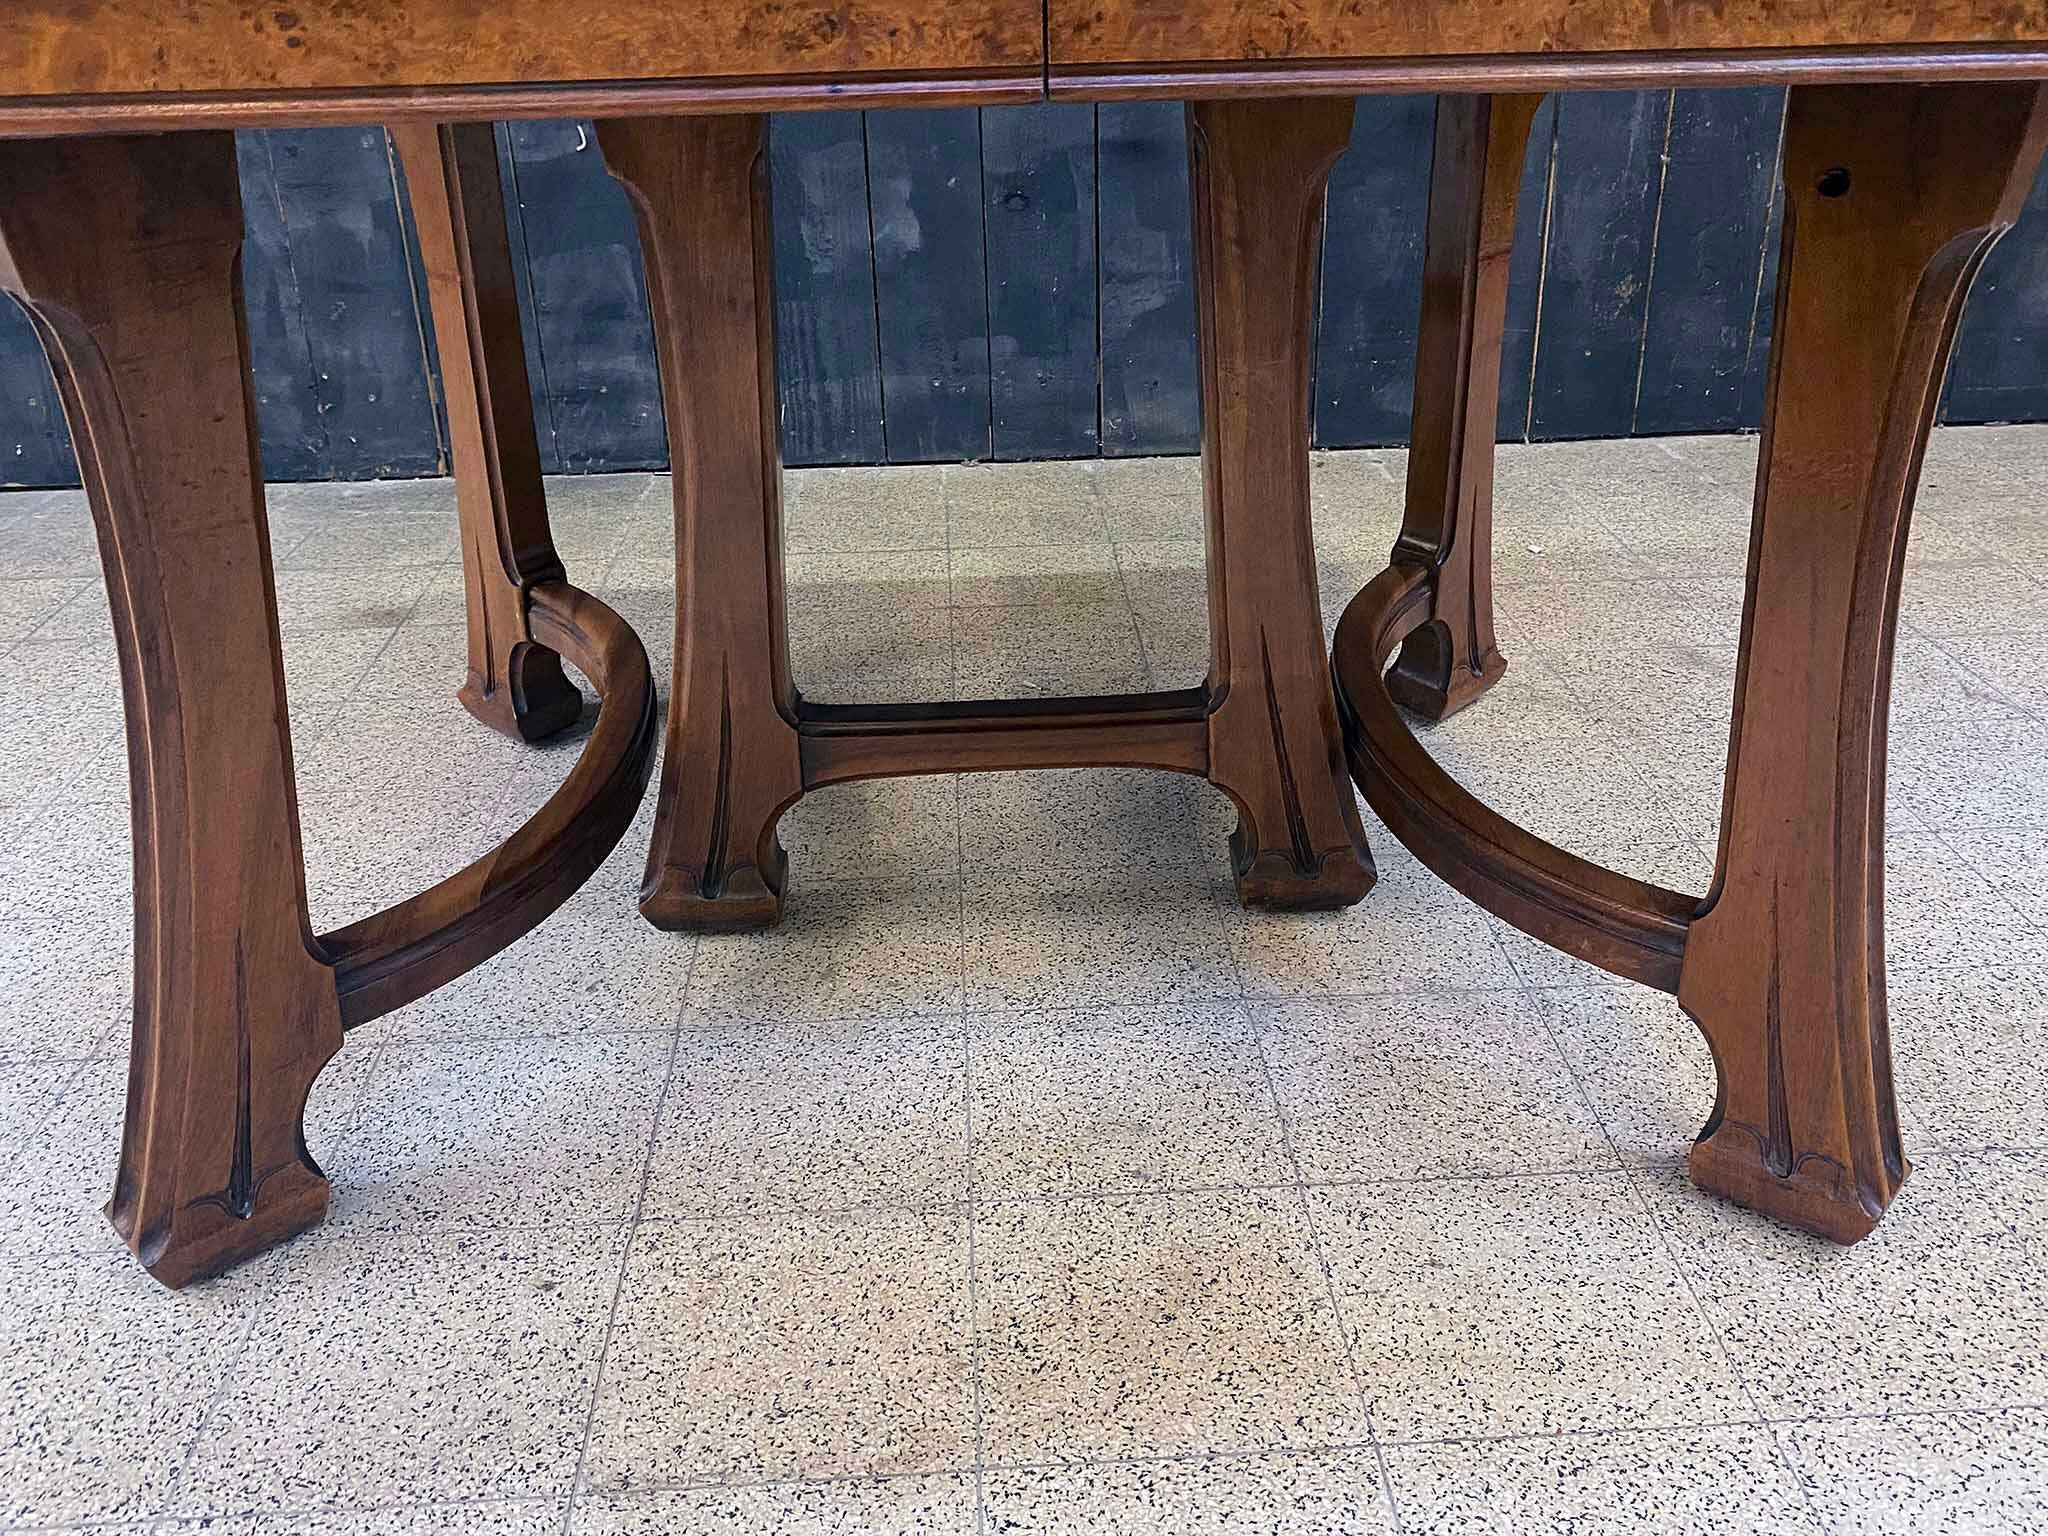 Attributed to Gauthier-Poinsignon & Cie, Art Nouveau Dining Room Table in Walnut For Sale 1